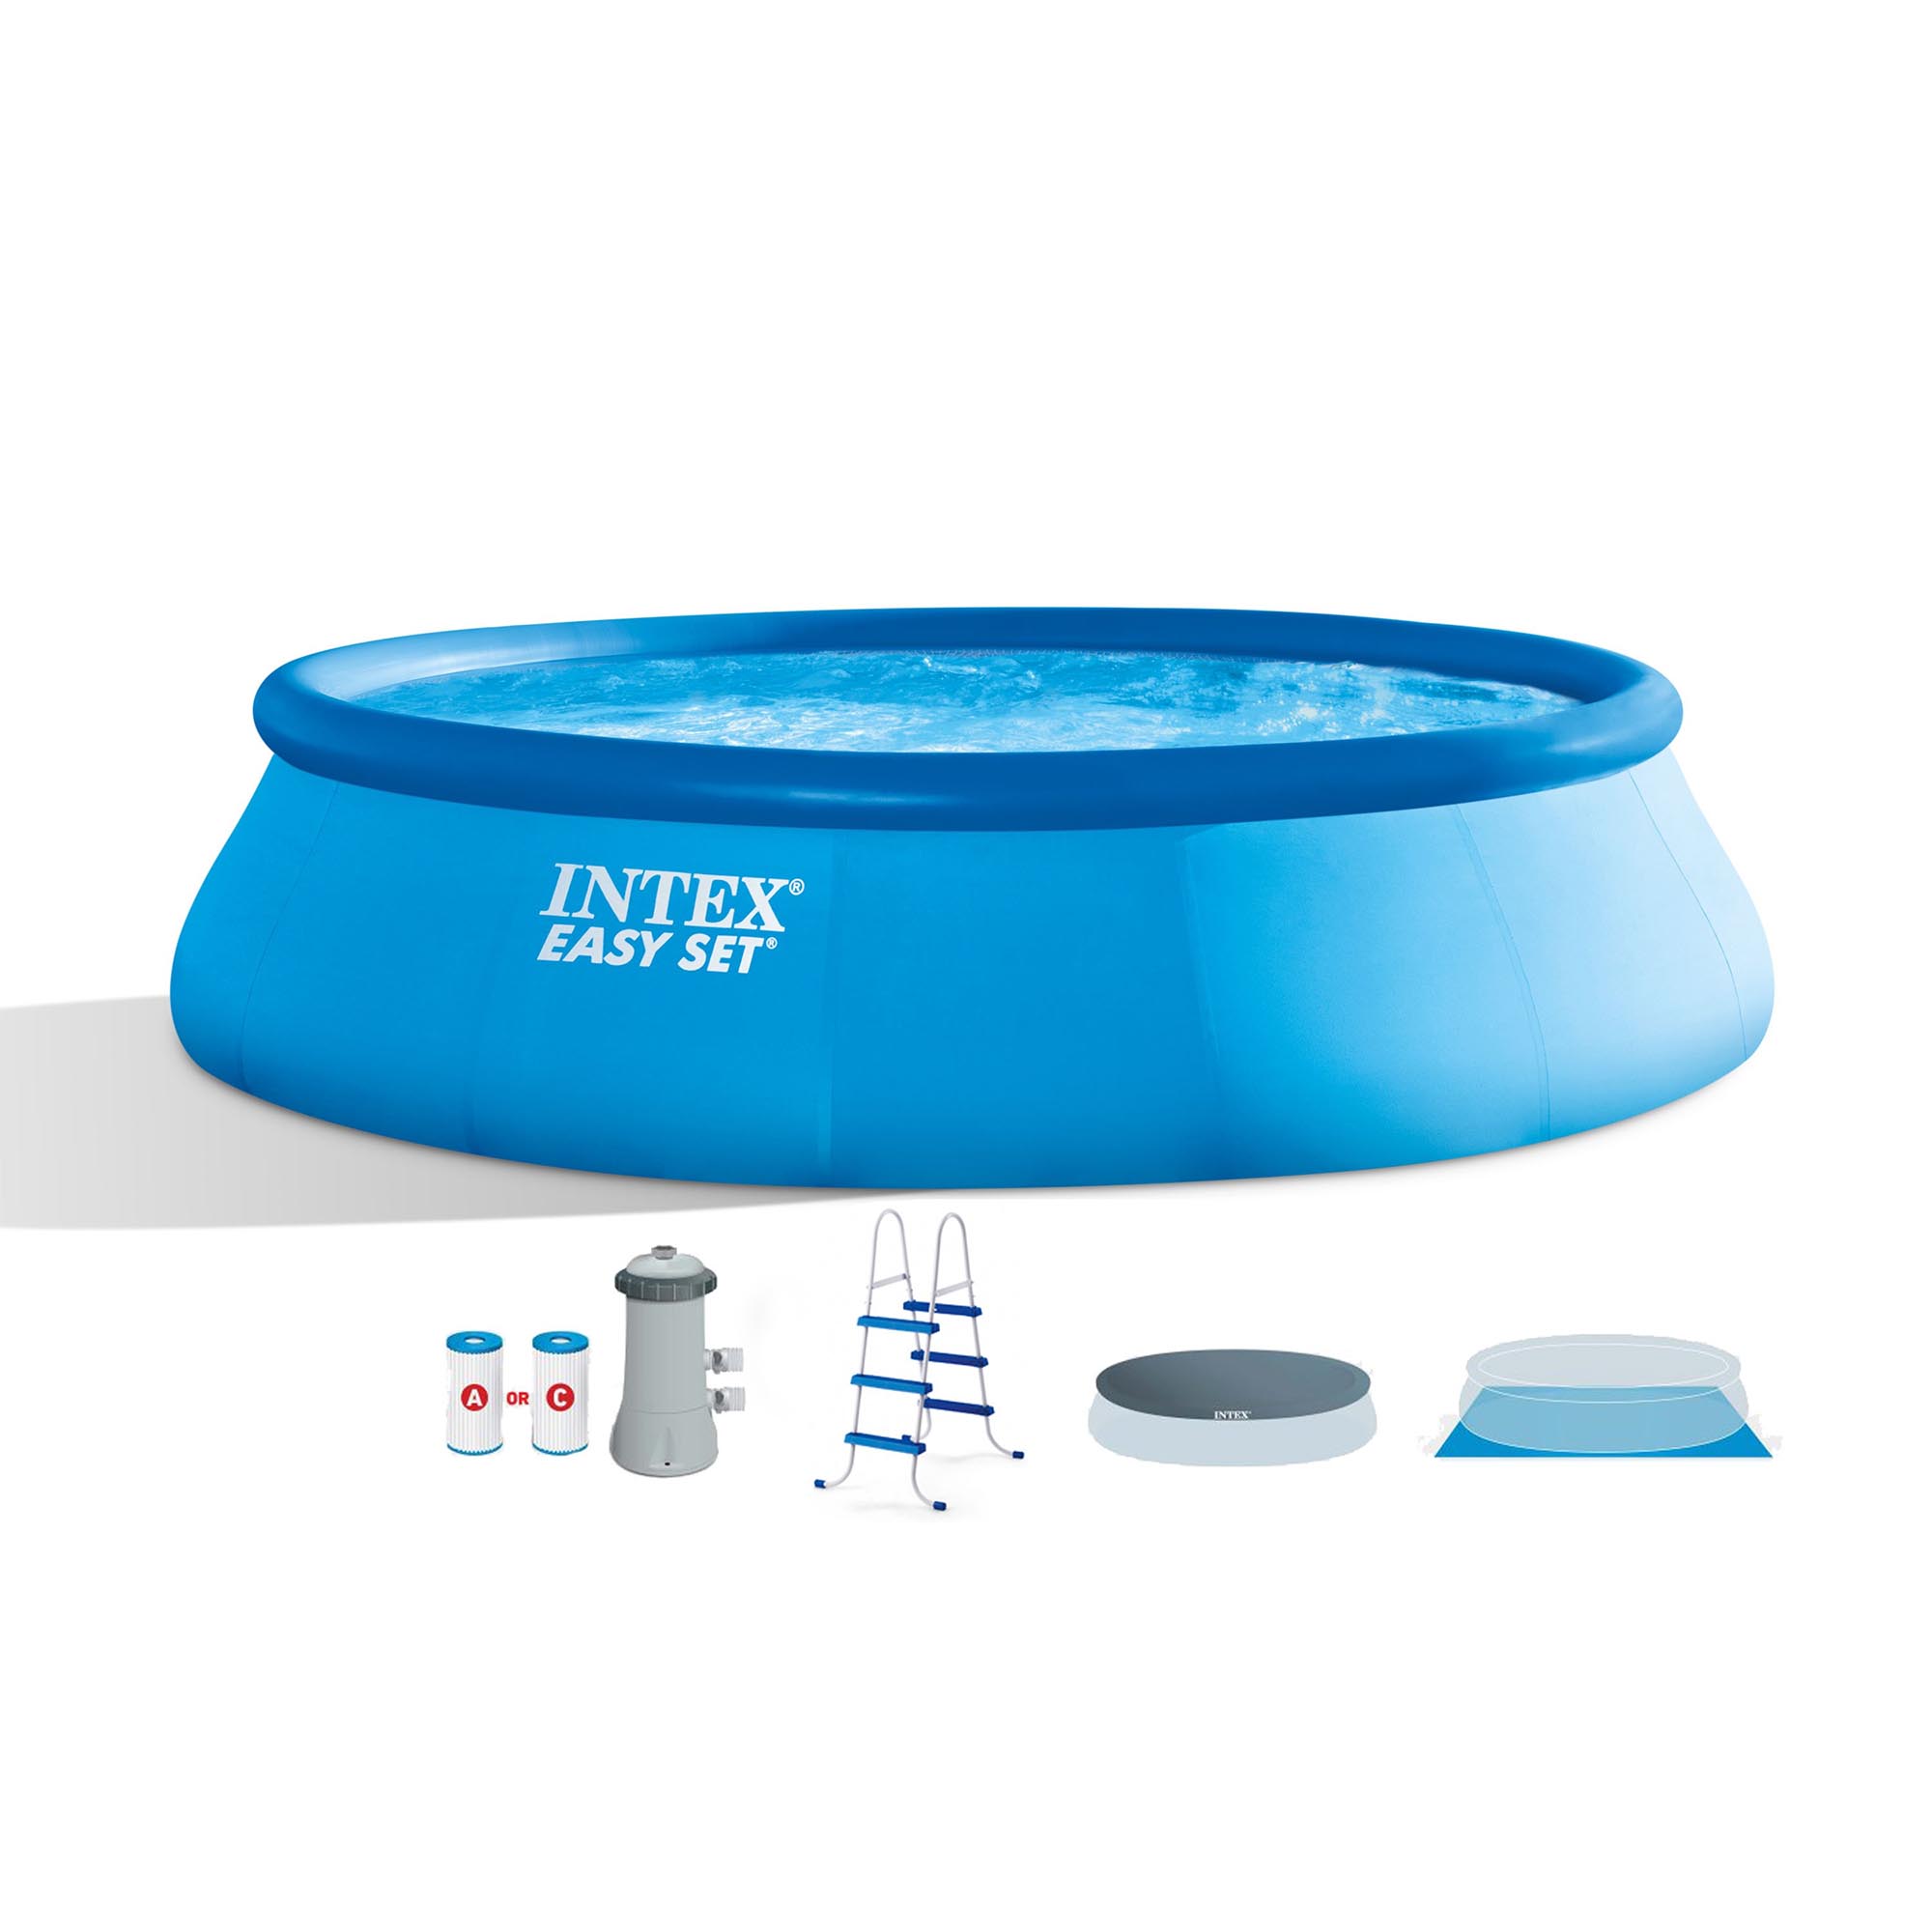 Intex Inflatable Easy Set 15-ft x 15-ft x 42-in Inflatable Top Ring Round Above-Ground Pool with Filter Pump,Ground Cloth,Pool Cover and Ladder the Above-Ground Pools department at Lowes.com